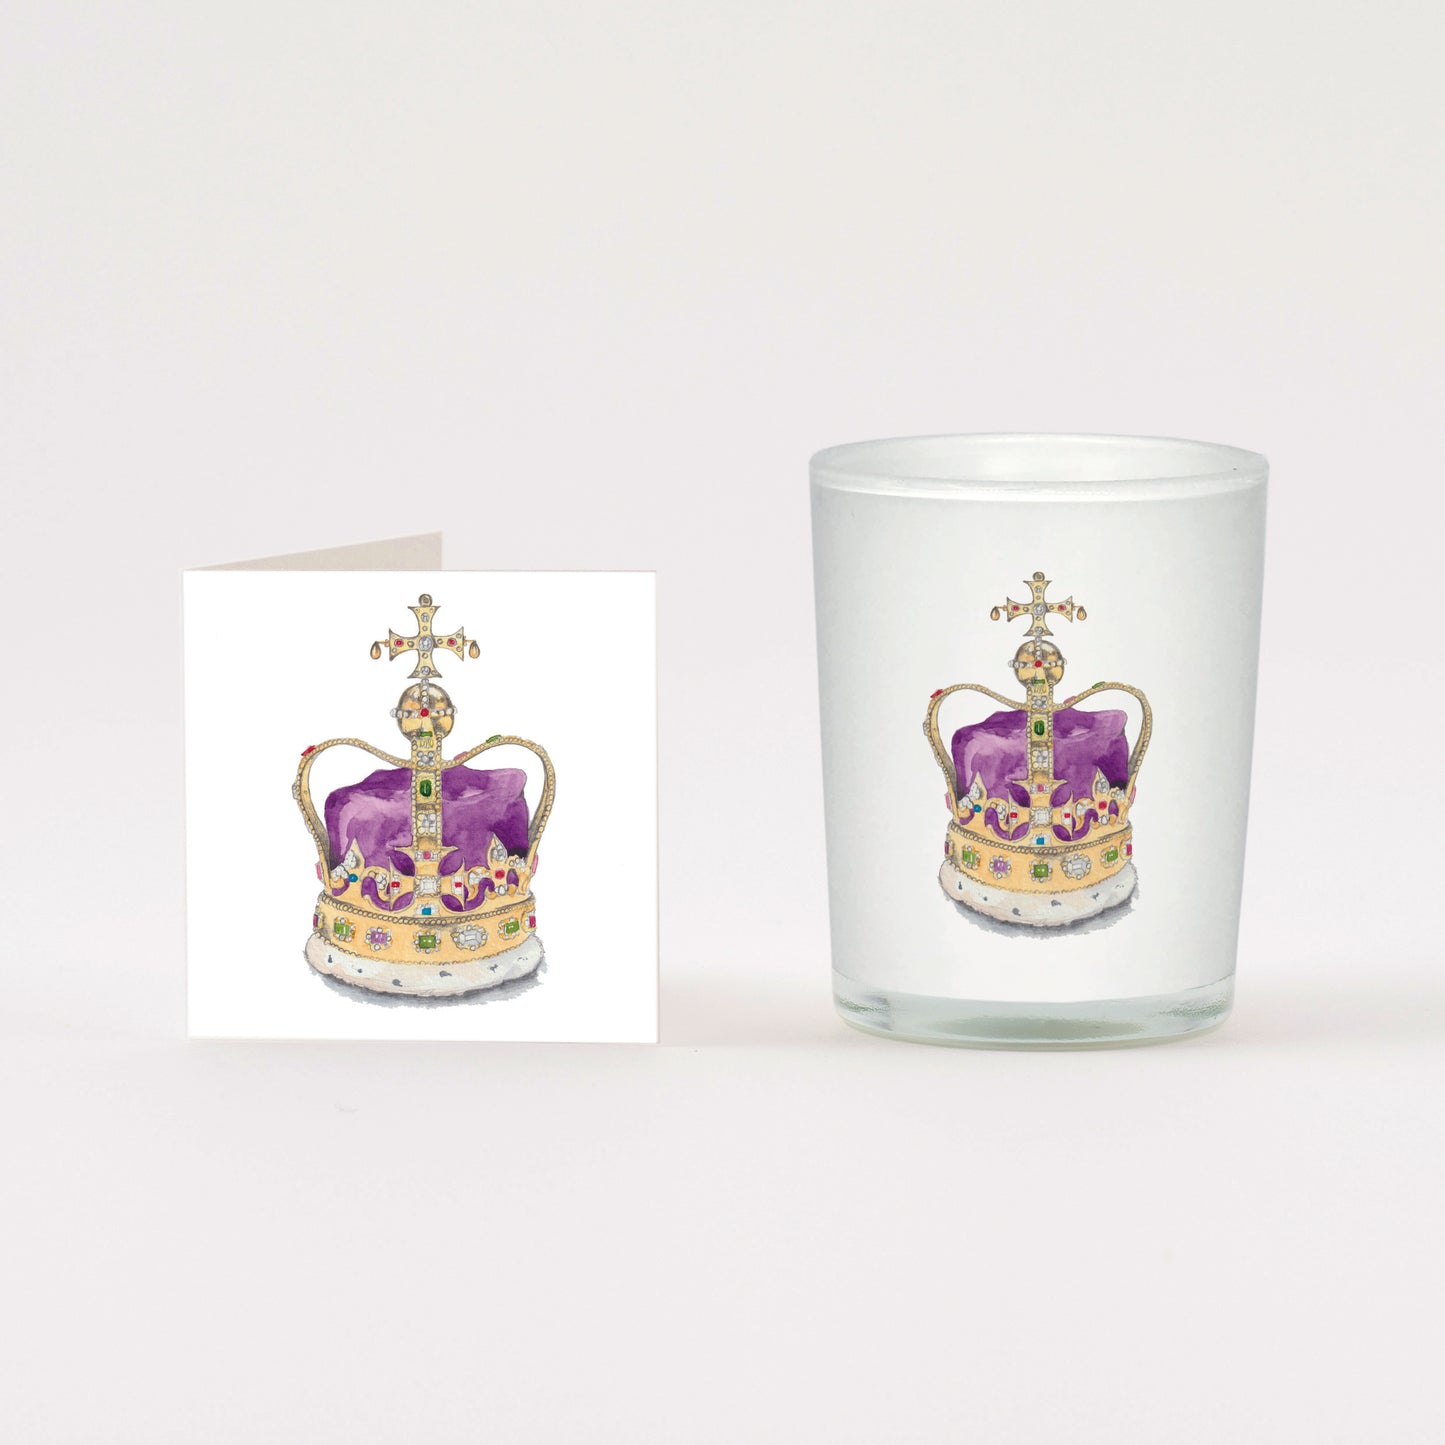 Coronation Crown Candle and Card Candles Crumble and Core   